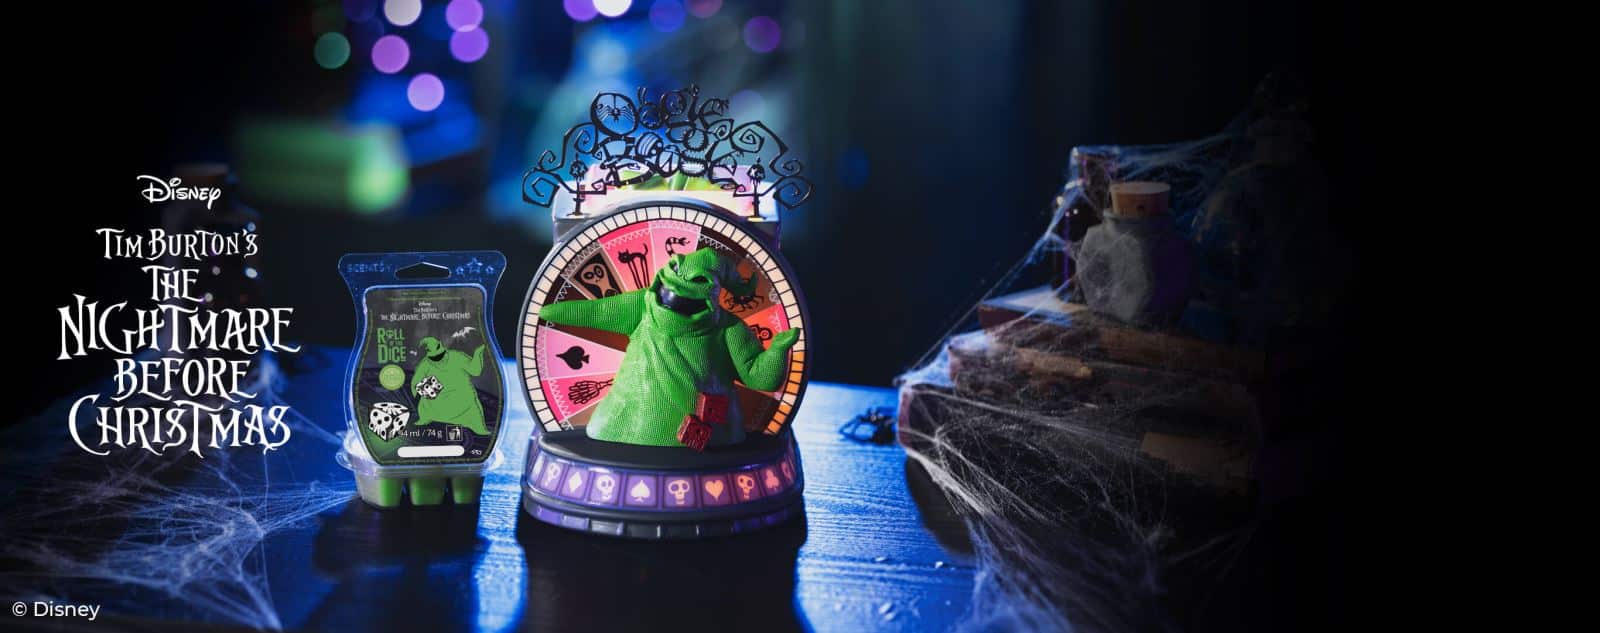 Scentsy Nightmare Before Christmas 2021 Products